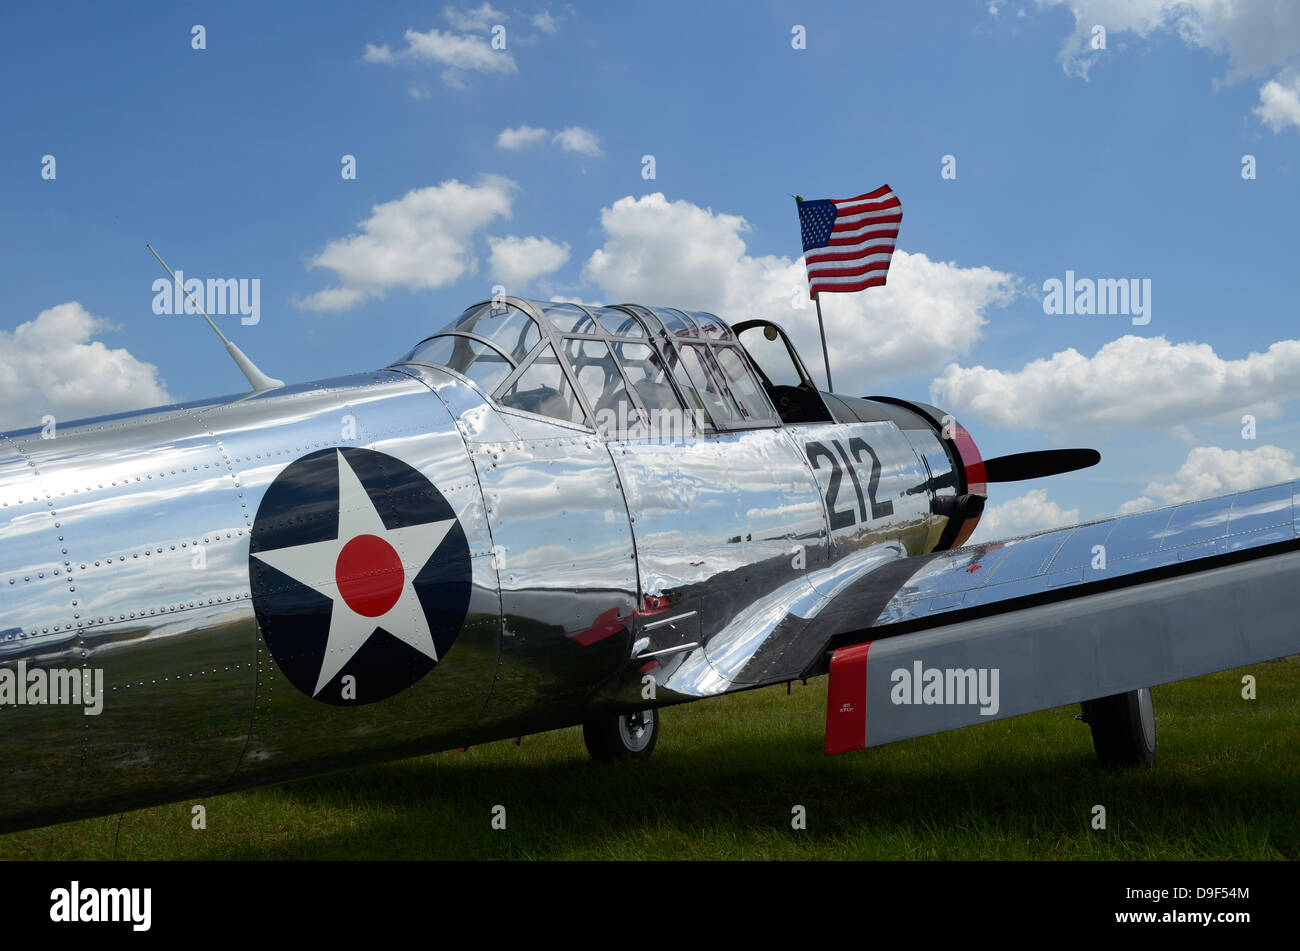 A BT-13 Valiant trainer aircraft with American Flag. Stock Photo